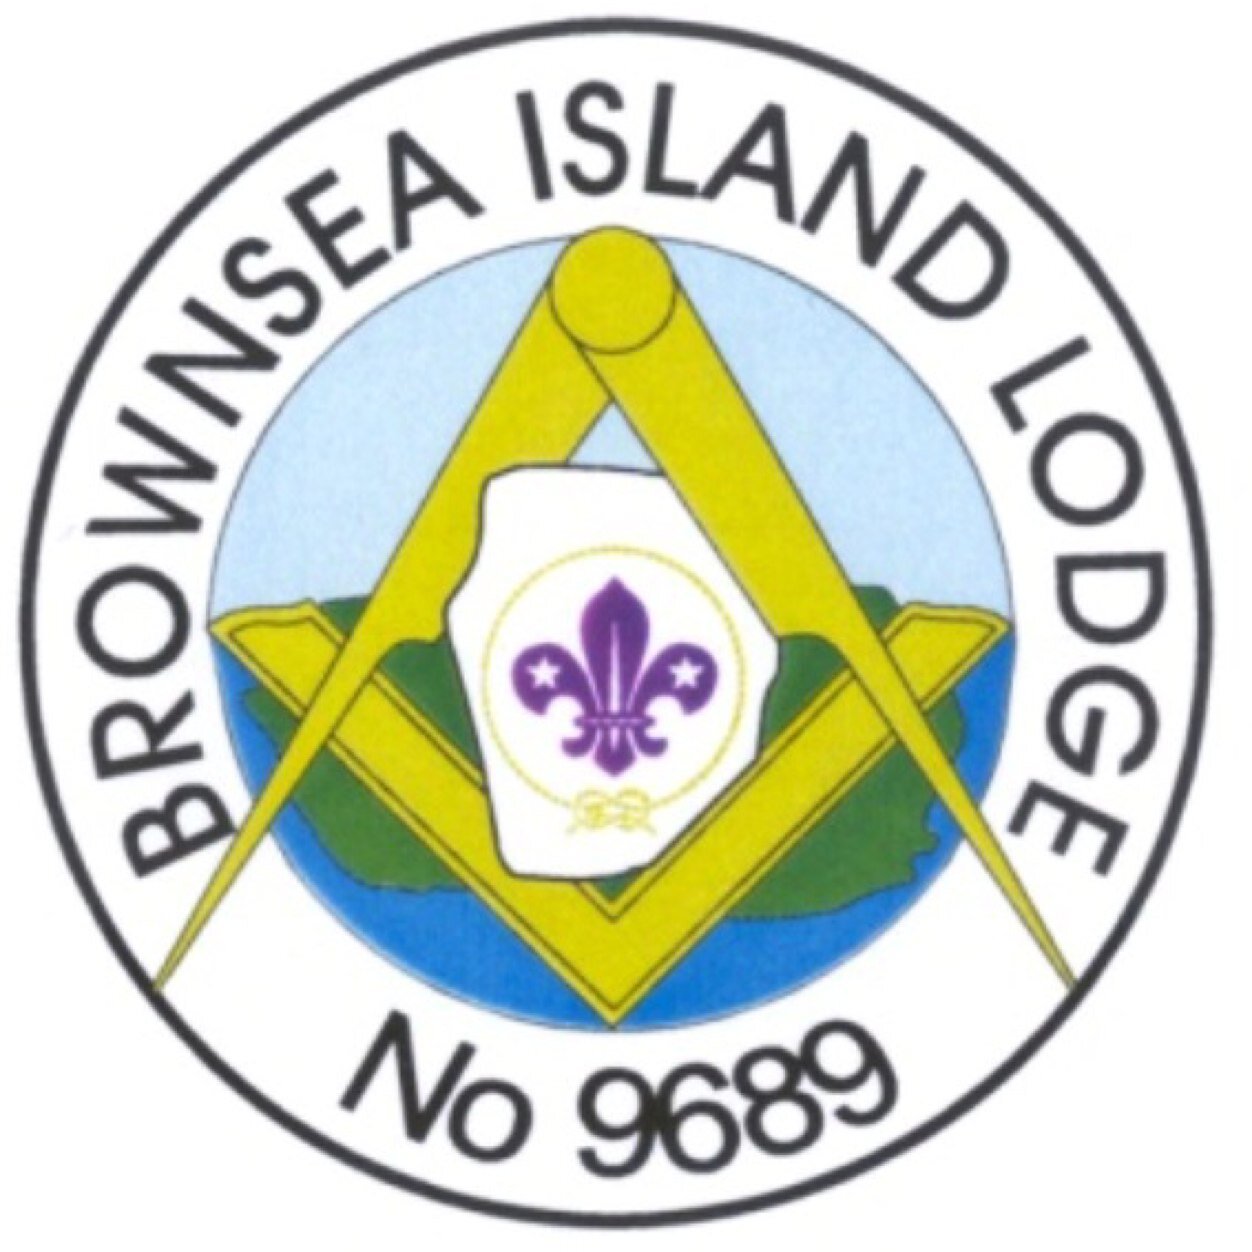 Brownsea Island Lodge No 9689 in the Province of Dorset. A lodge of Freemasons comprising of members, former members and supporters of Scouting.